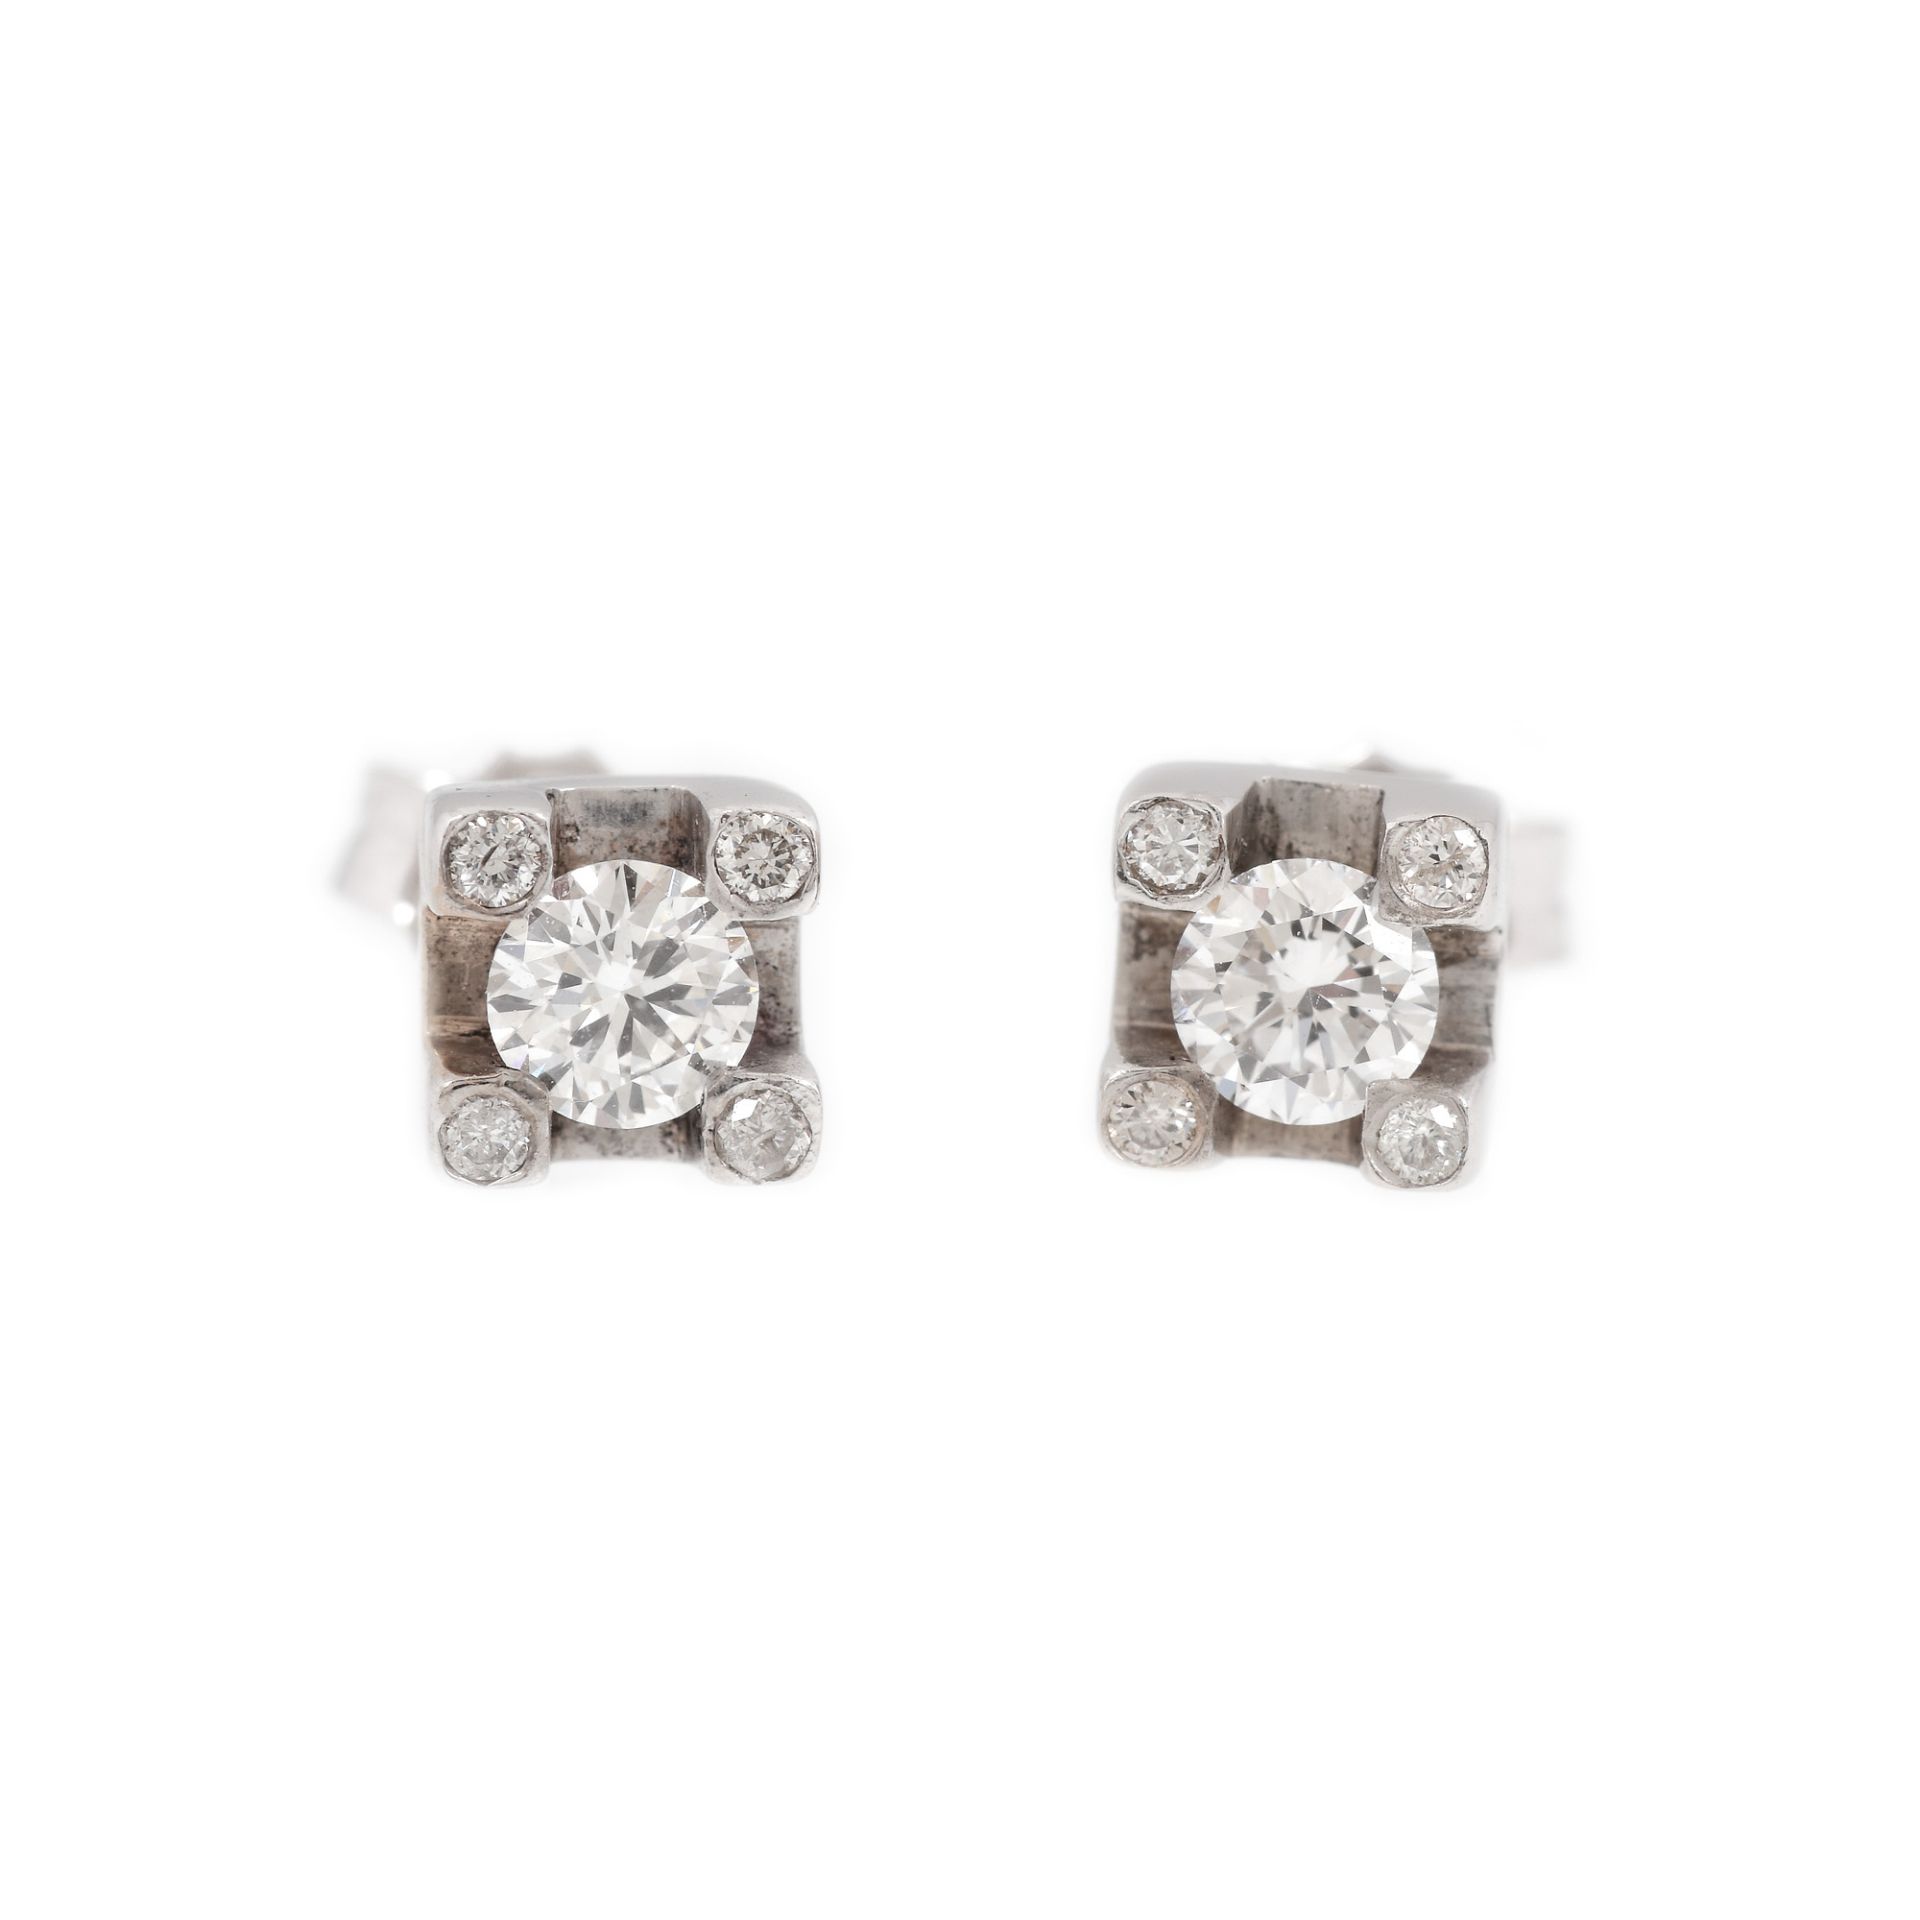 Pair of white gold earrings decorated with diamonds